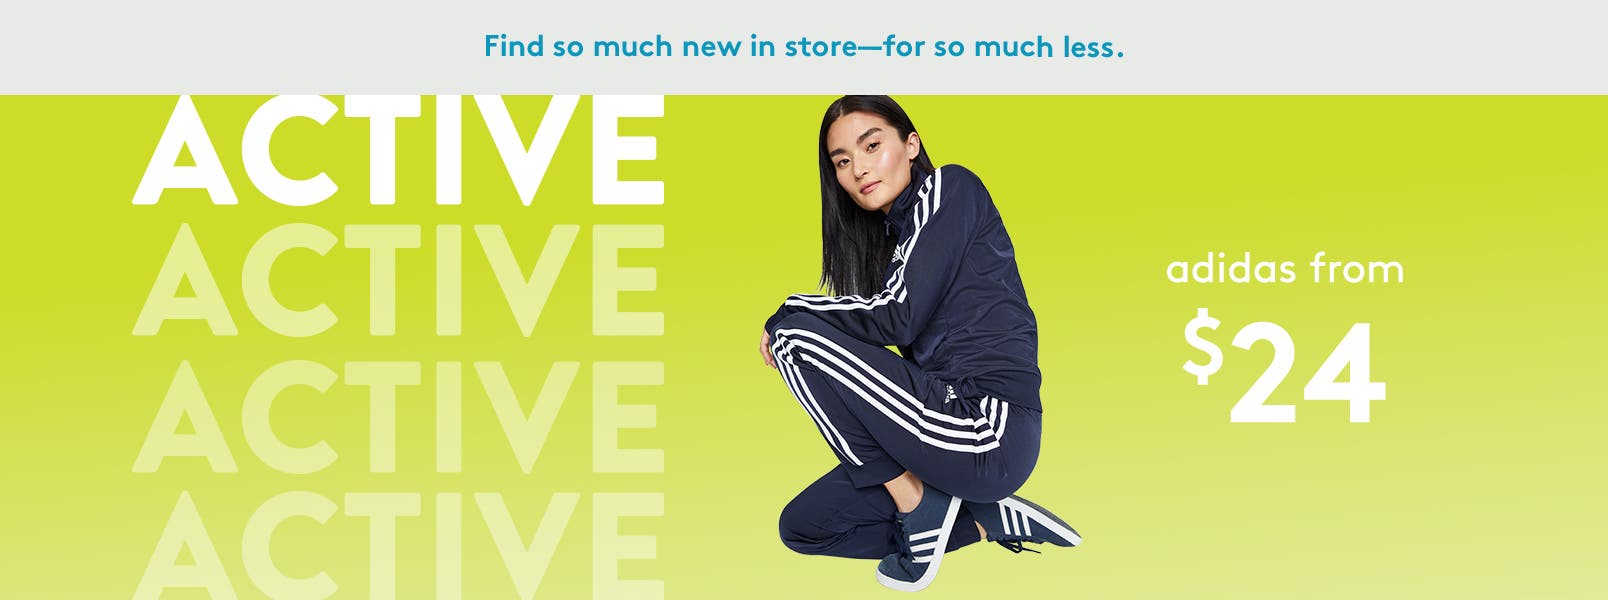 Find so much new in store for so much less. 
Like active styles for women by Adidas from twenty-four dollars.